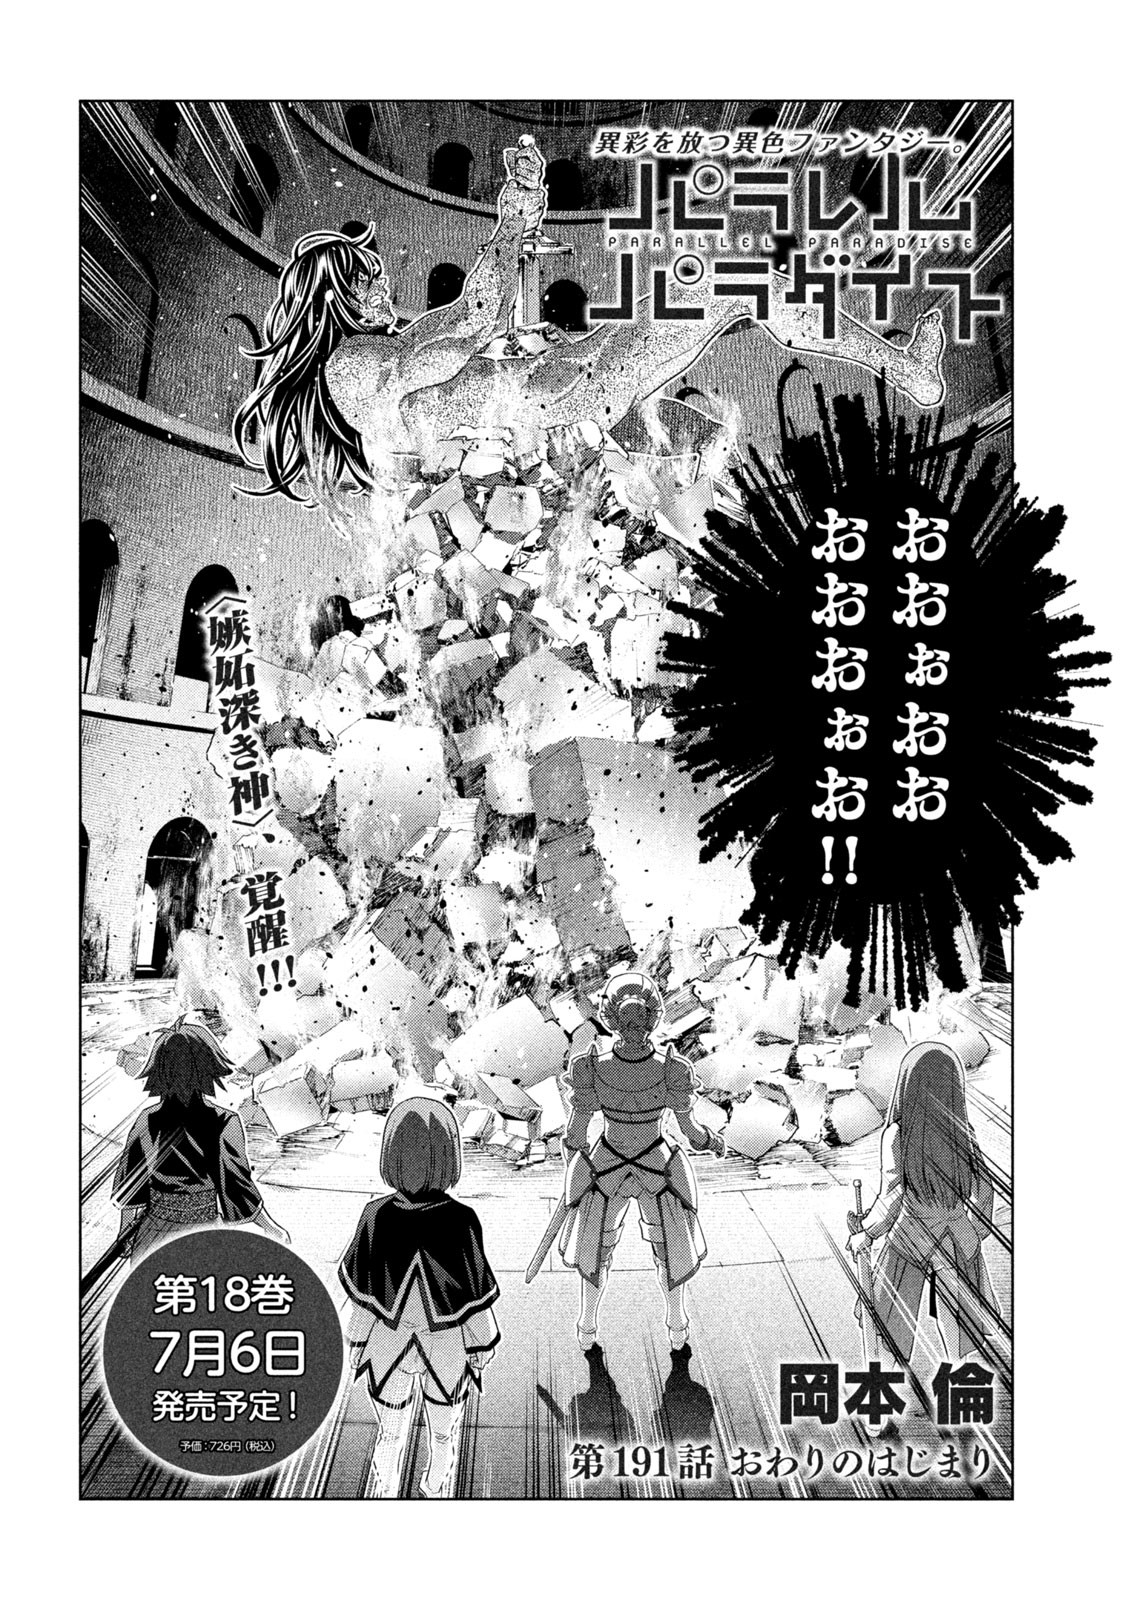 DISC] Parallel Paradise Chapter 190 : r/manga